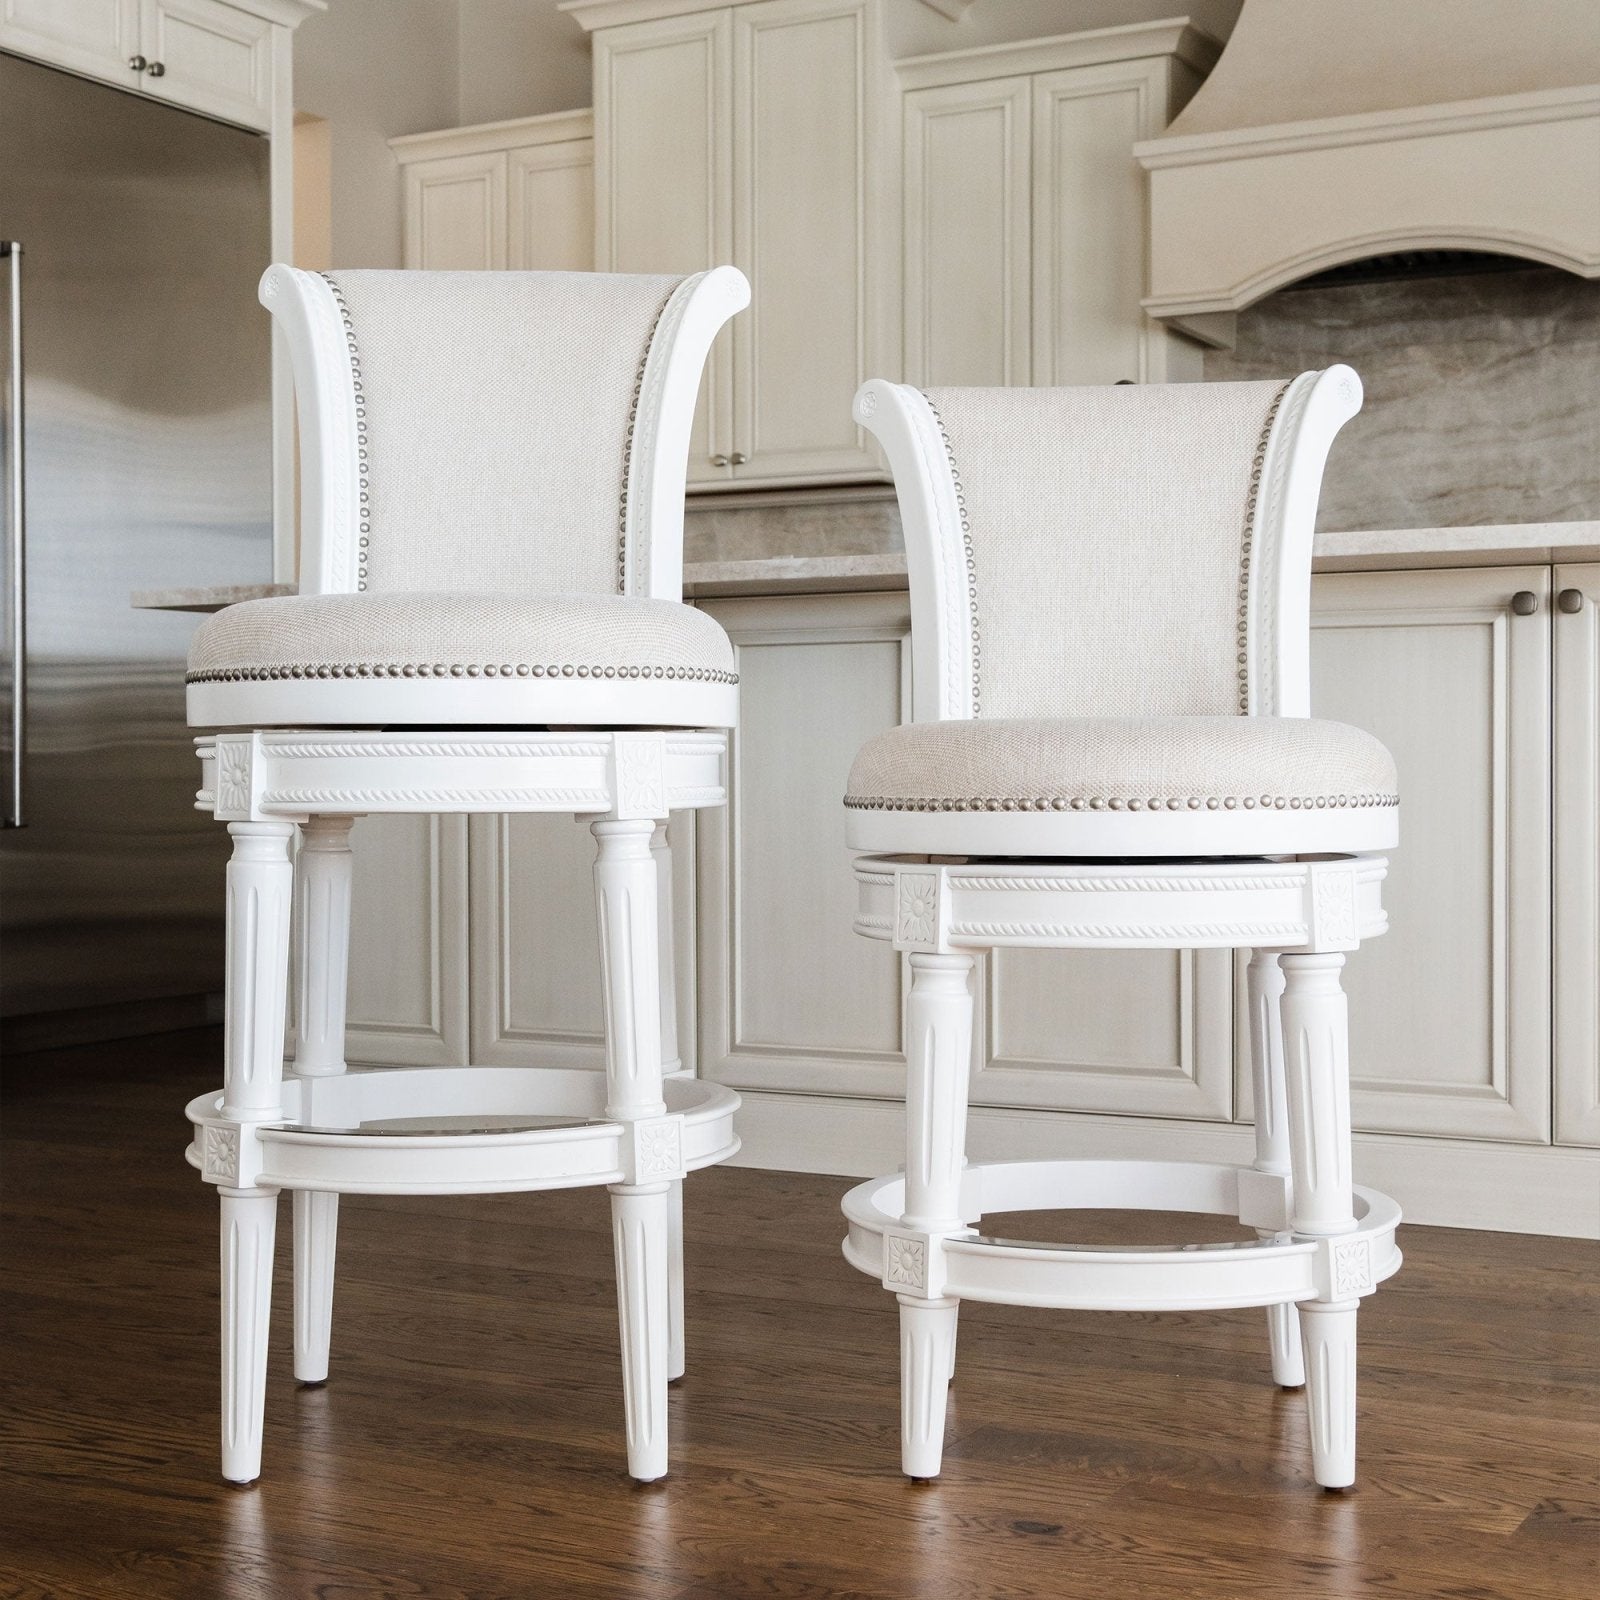 Pullman Counter Stool in Alabaster White Finish with Cream Fabric Upholstery in Stools by Maven Lane